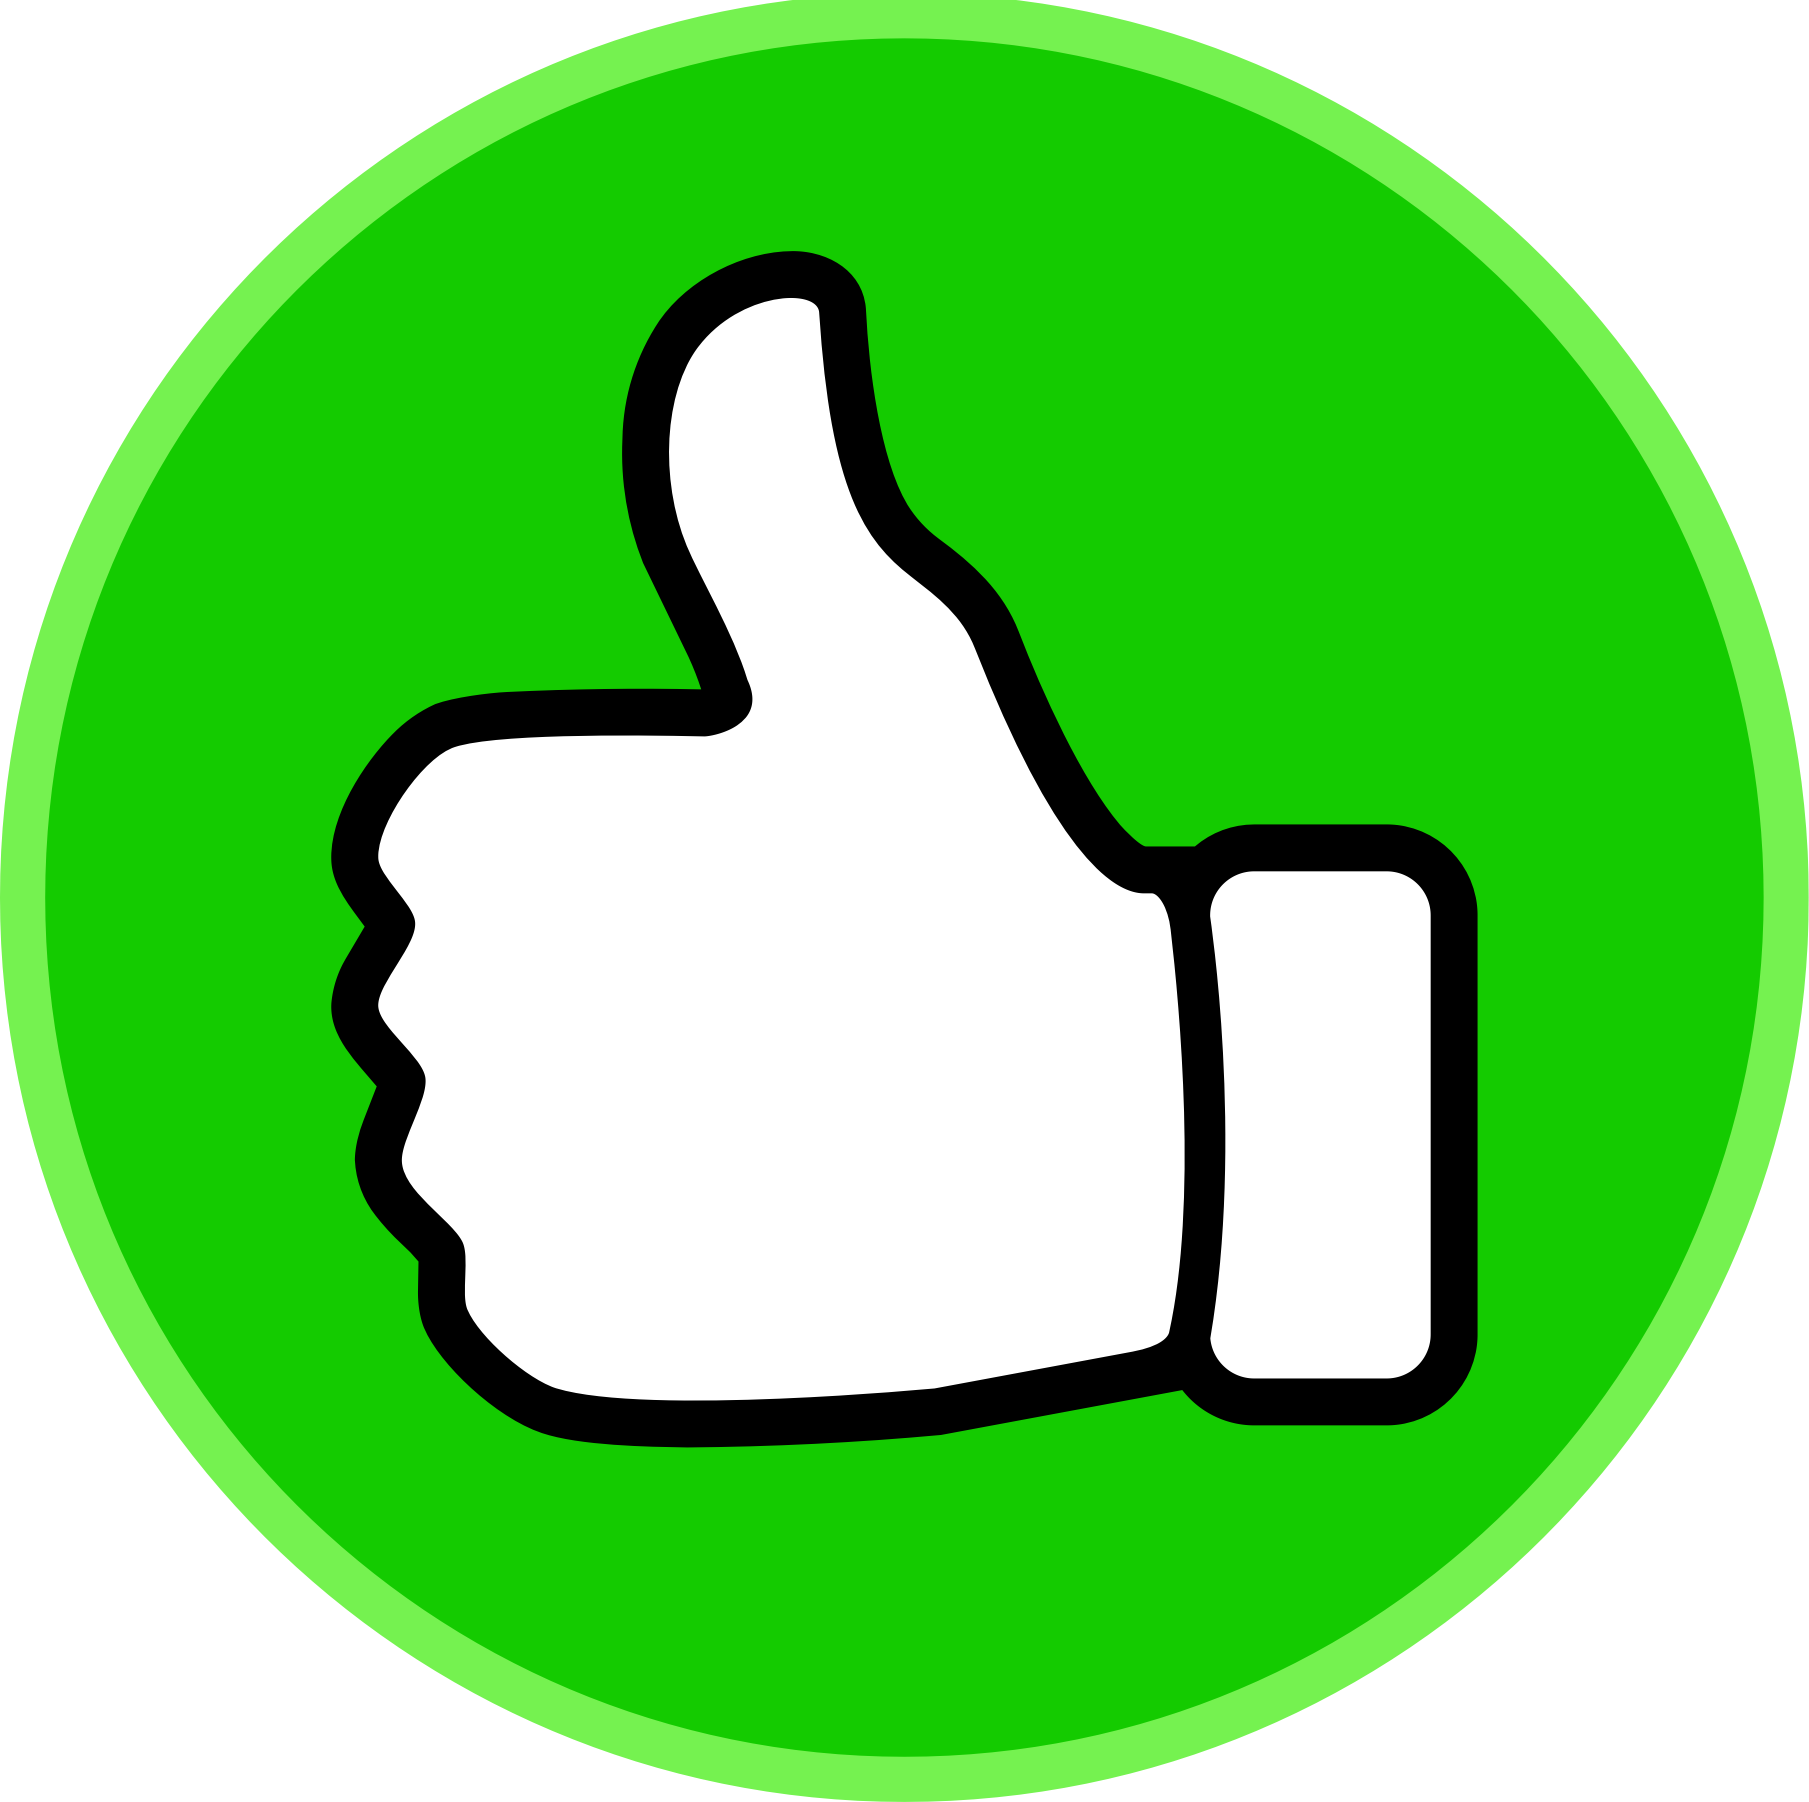 Free Thumbs Up Clipart Pictures - Clipartix